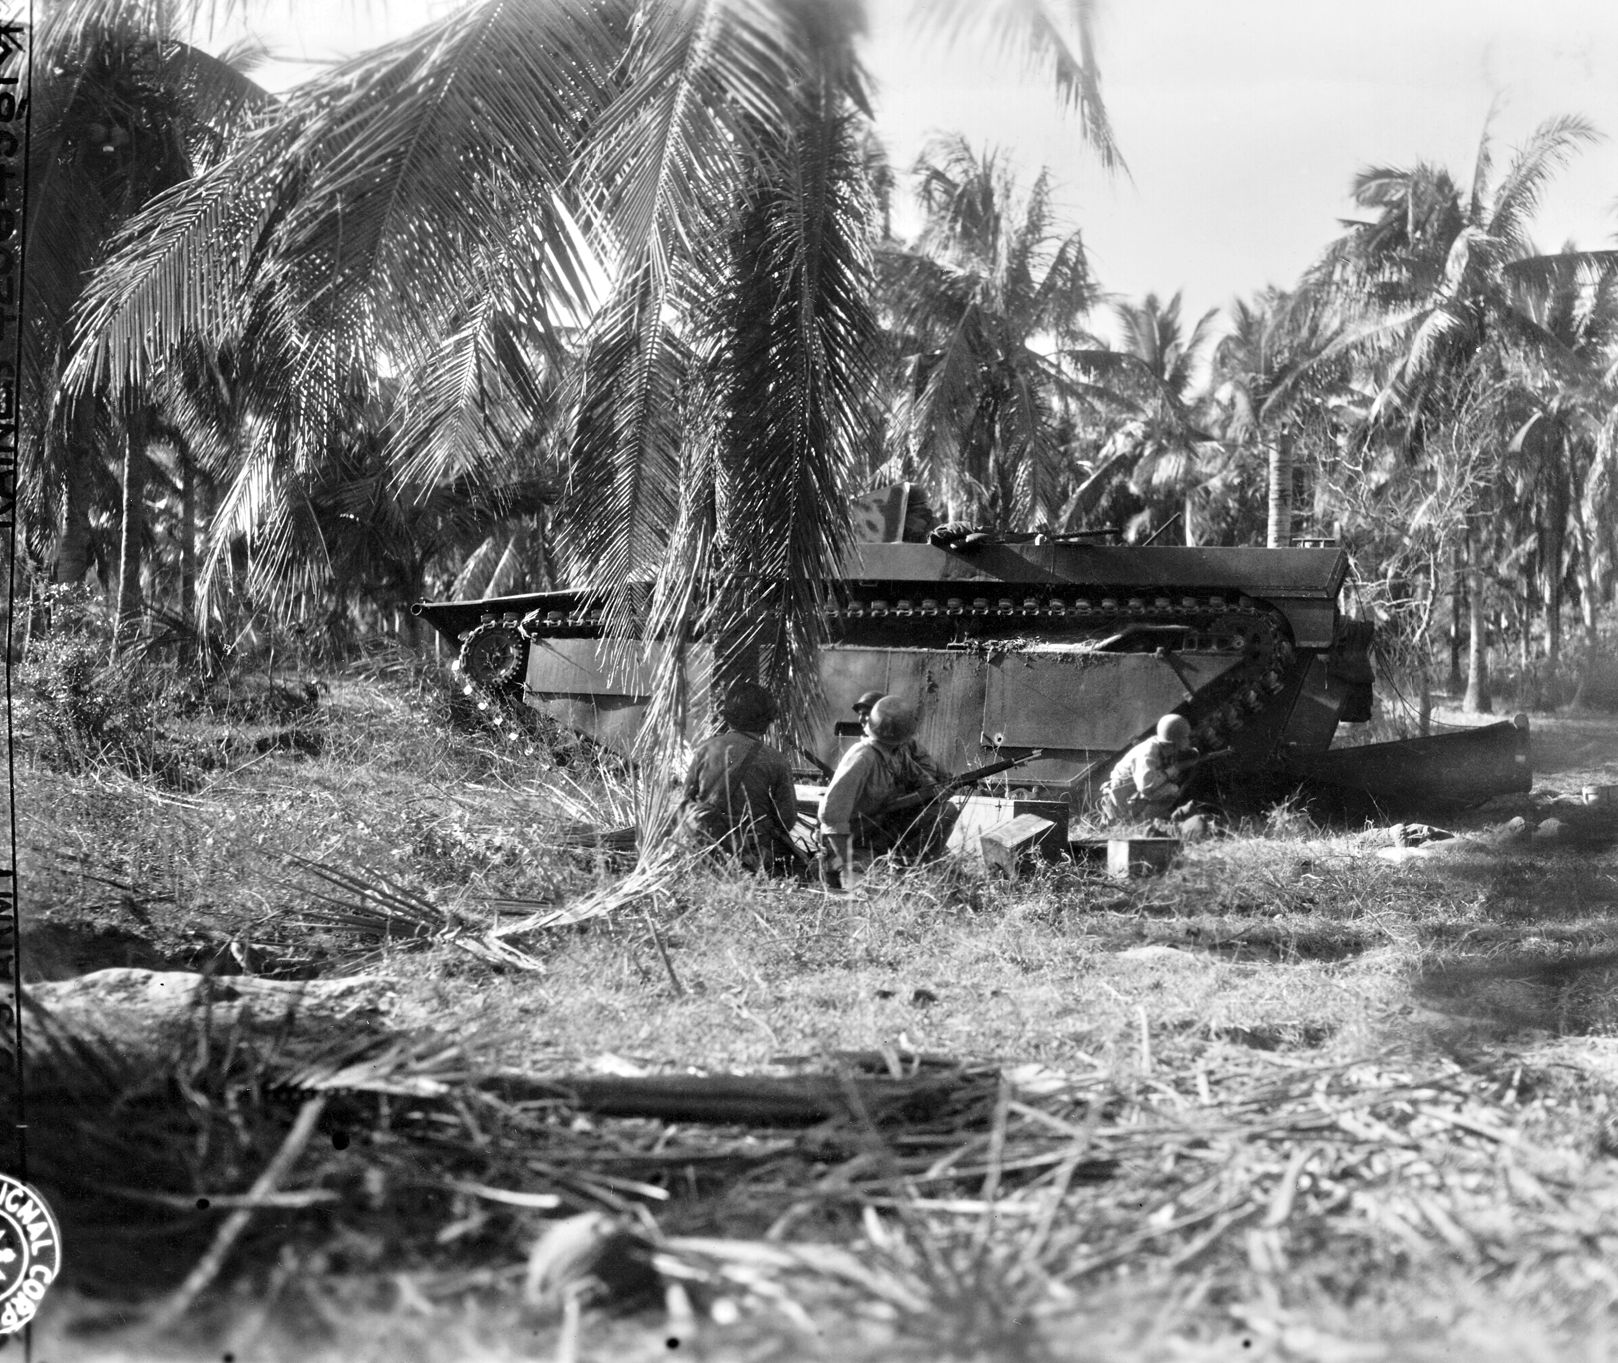 The first wave of the 43rd Infantry Division lands at Lingayen Gulf, Luzon, January 9, 1945, and fires on the enemy from behind their Alligator, officially known as an LVT, for Landing Vehicle. Their seaborne assault was greatly aided by the Marine pilots.